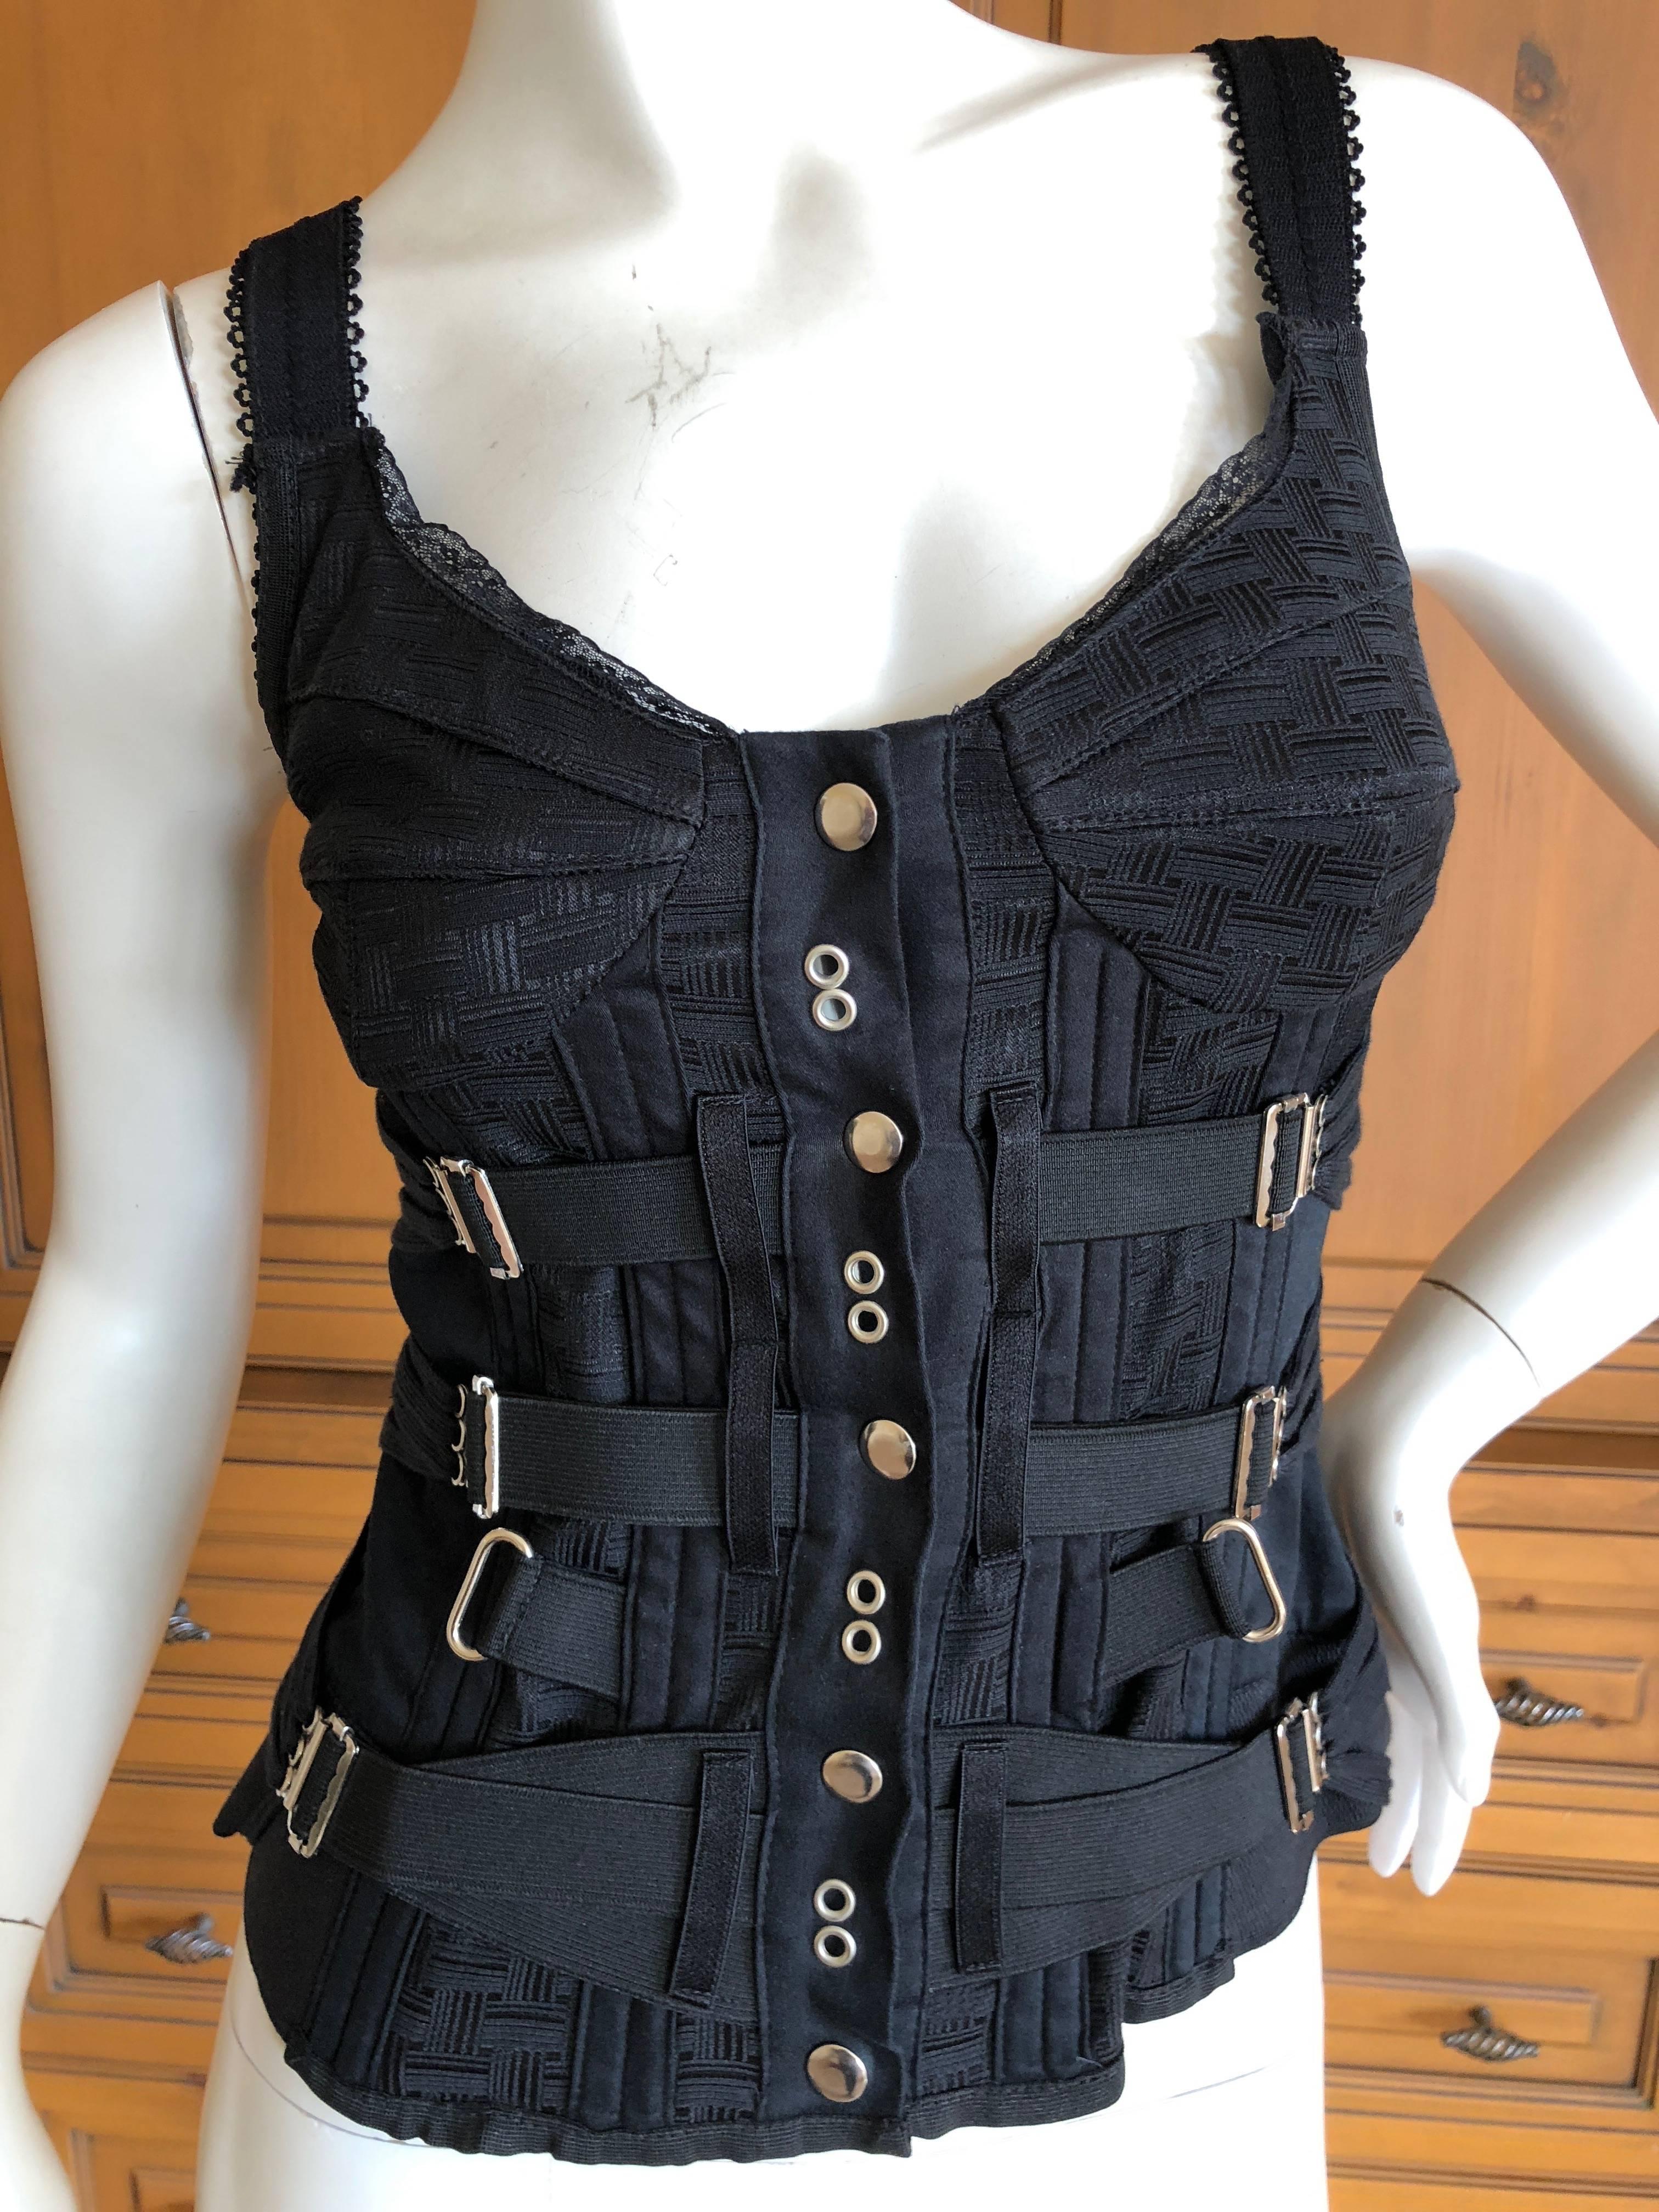 Dolce & Gabbana D&G Vintage Black Bondage Strap Bustier Top
There is  a lot of stretch, it snaps up the front.
Size 40
Bust 34